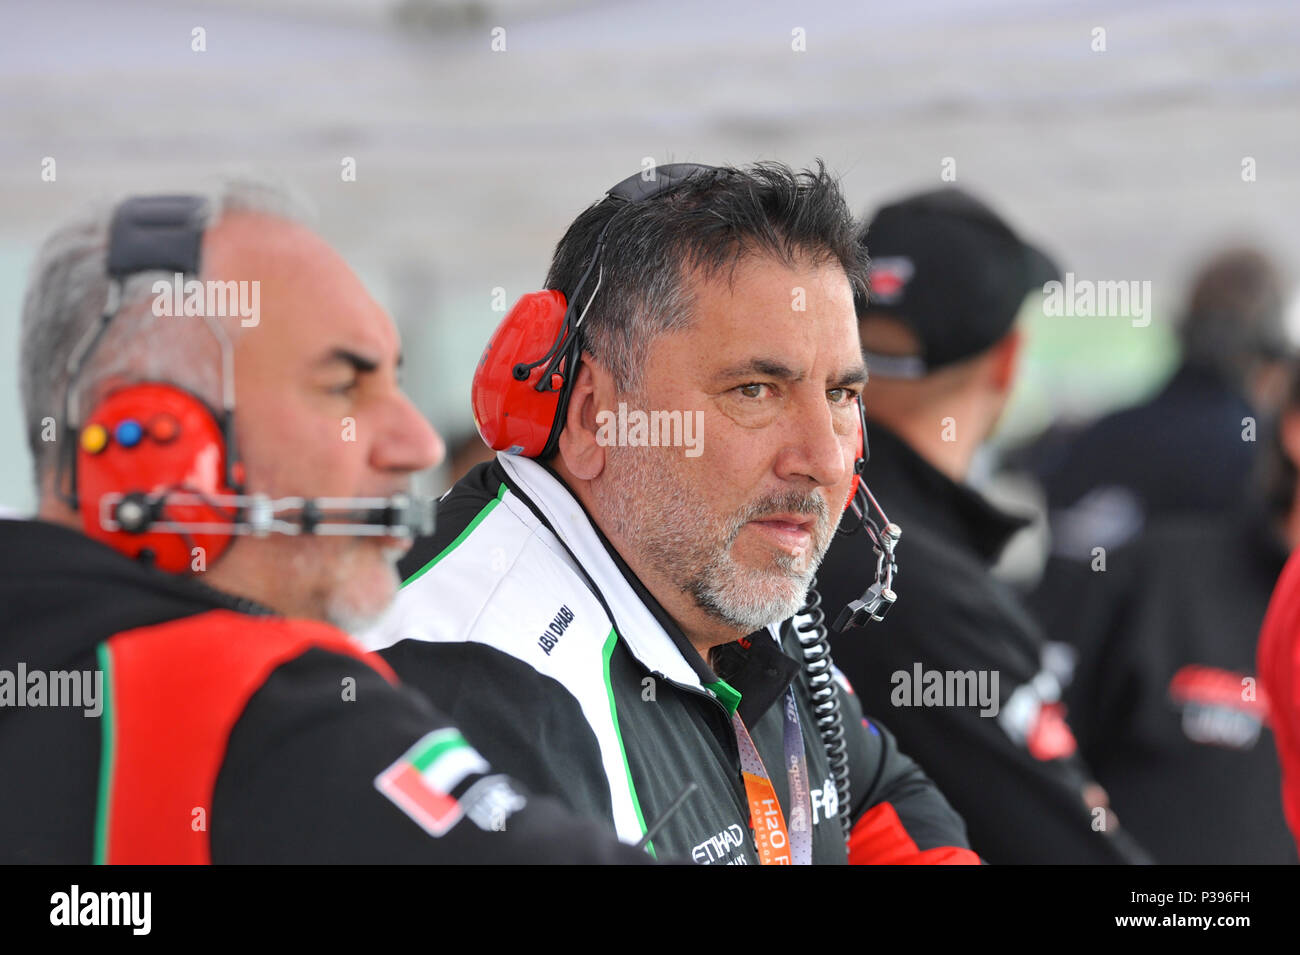 London, UK. 17th June, 2018. Guido Cappellini (Technical Director) and  Attilio Donzelli (Assistant Team Manager) watching the Team Abu Dhabi boats  racing in the UIM F1H2O London Grand Prix, part of the